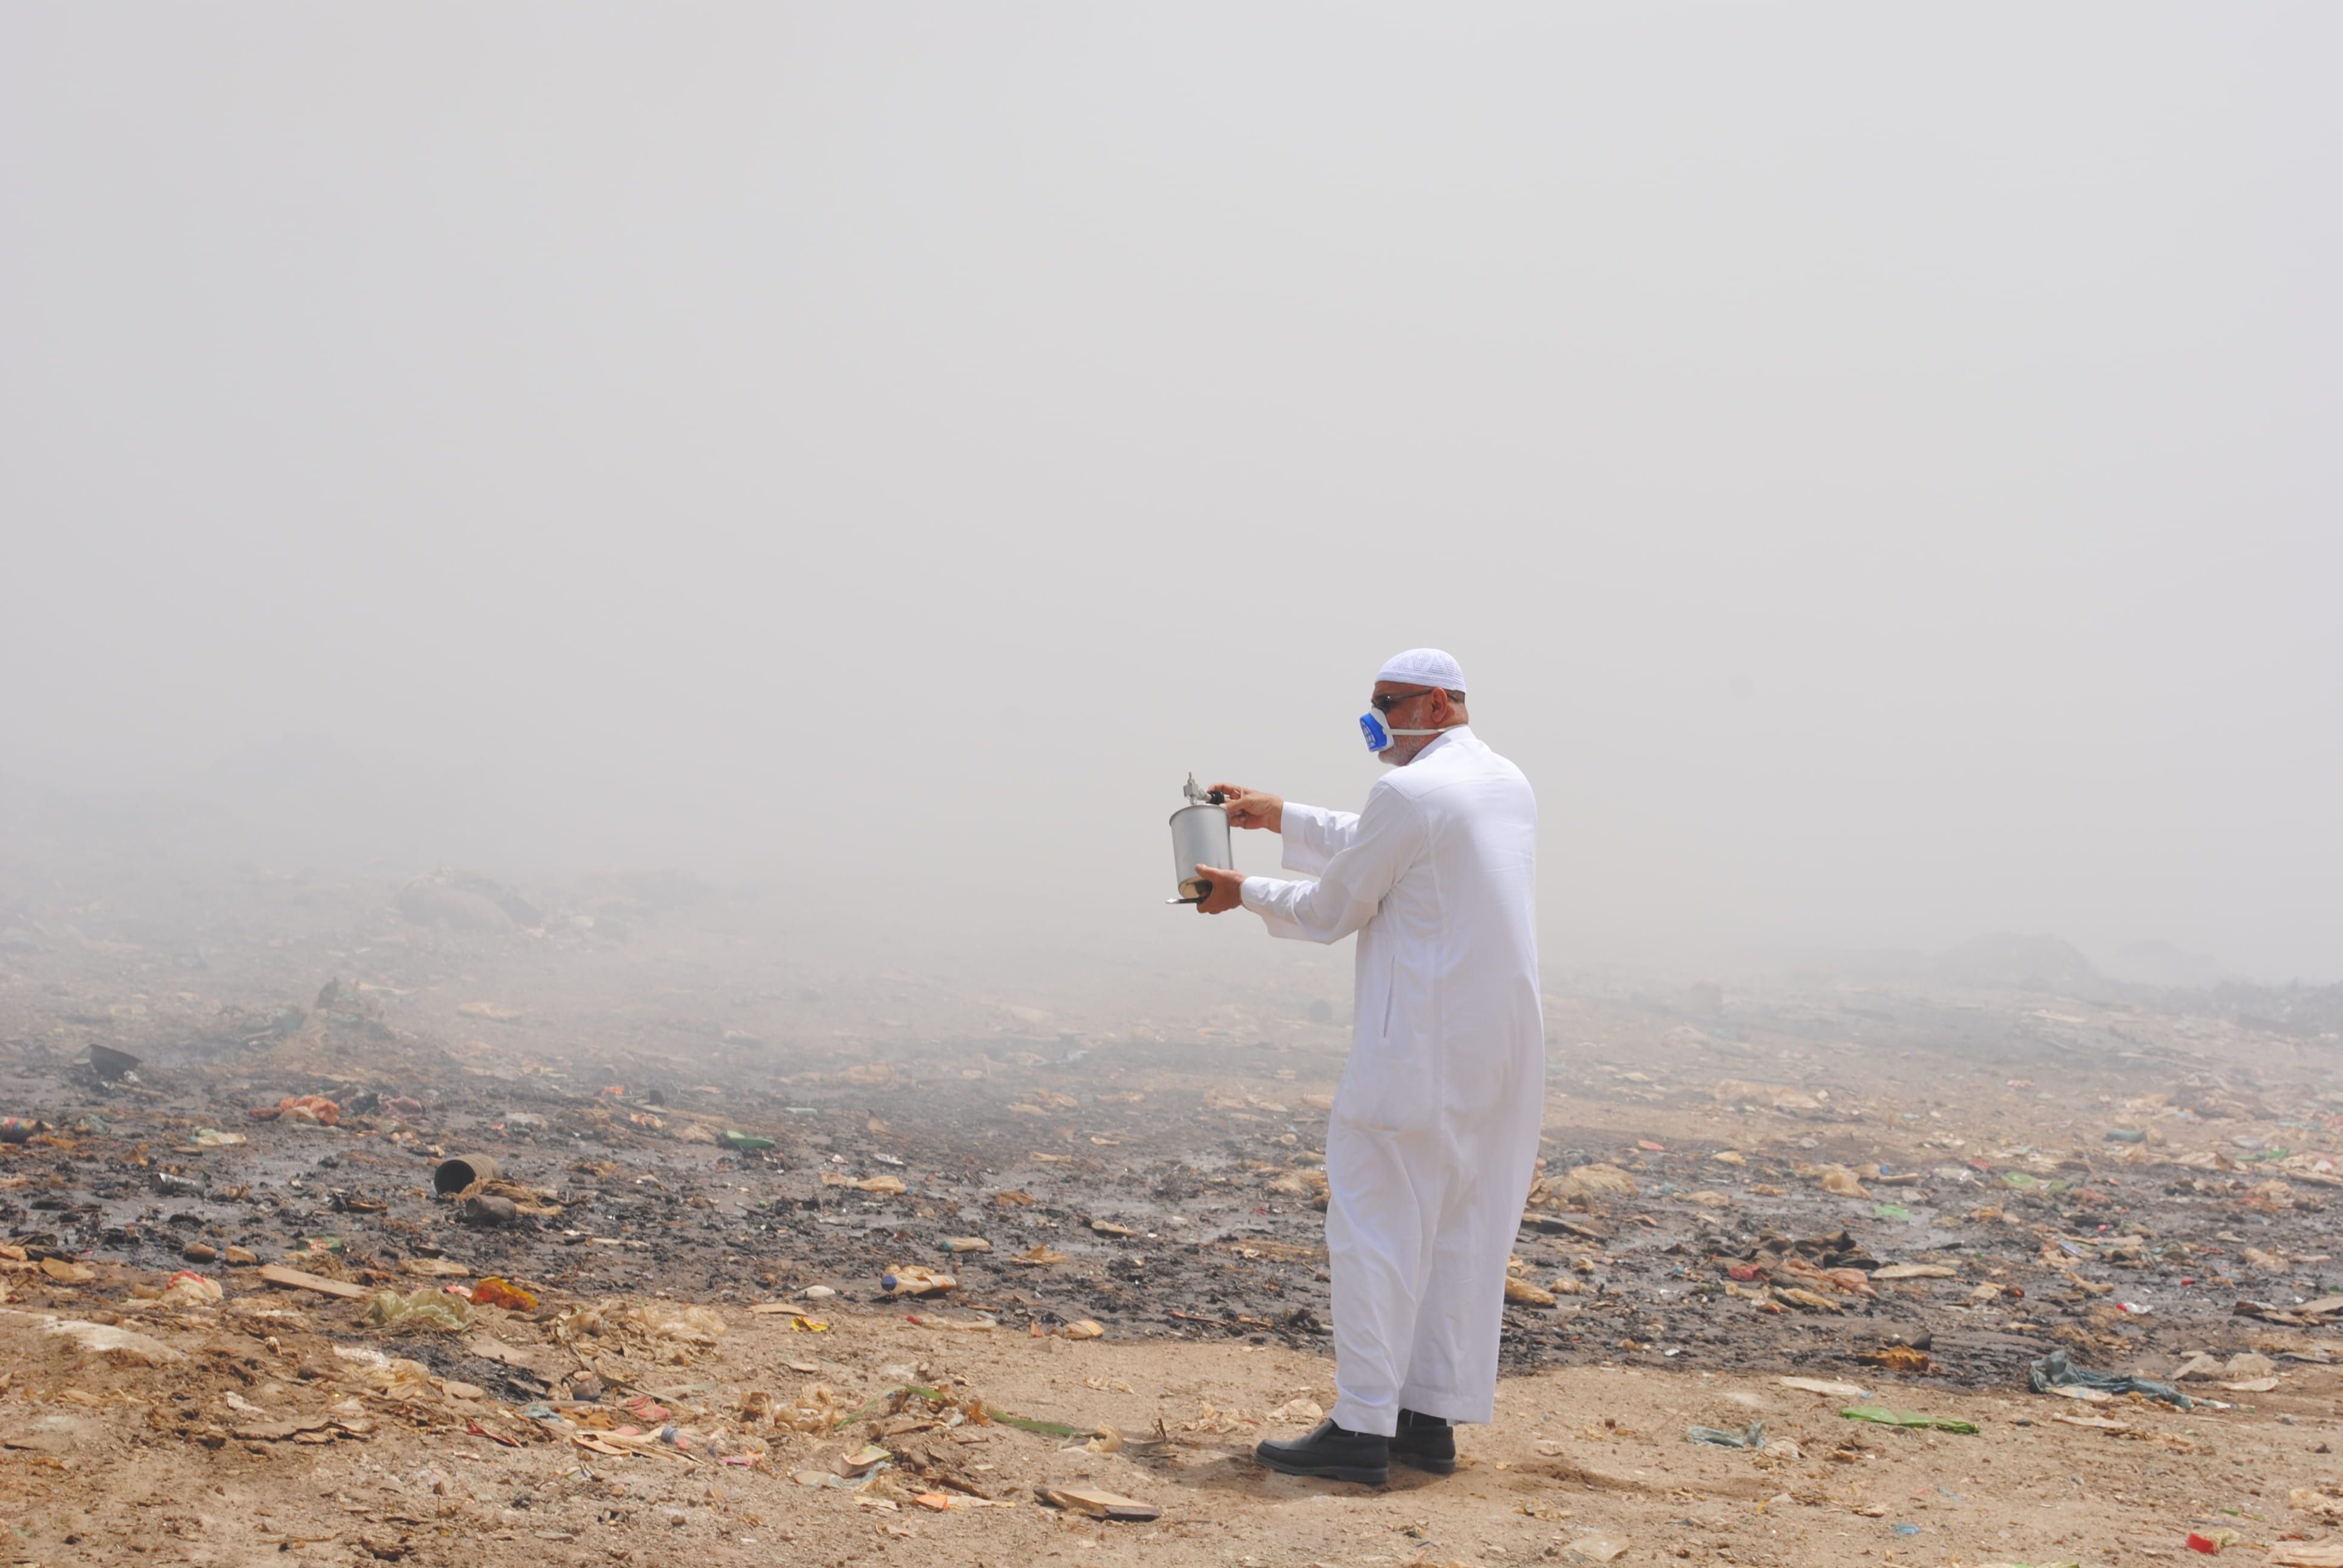 Researcher testing air pollution in the Middle East